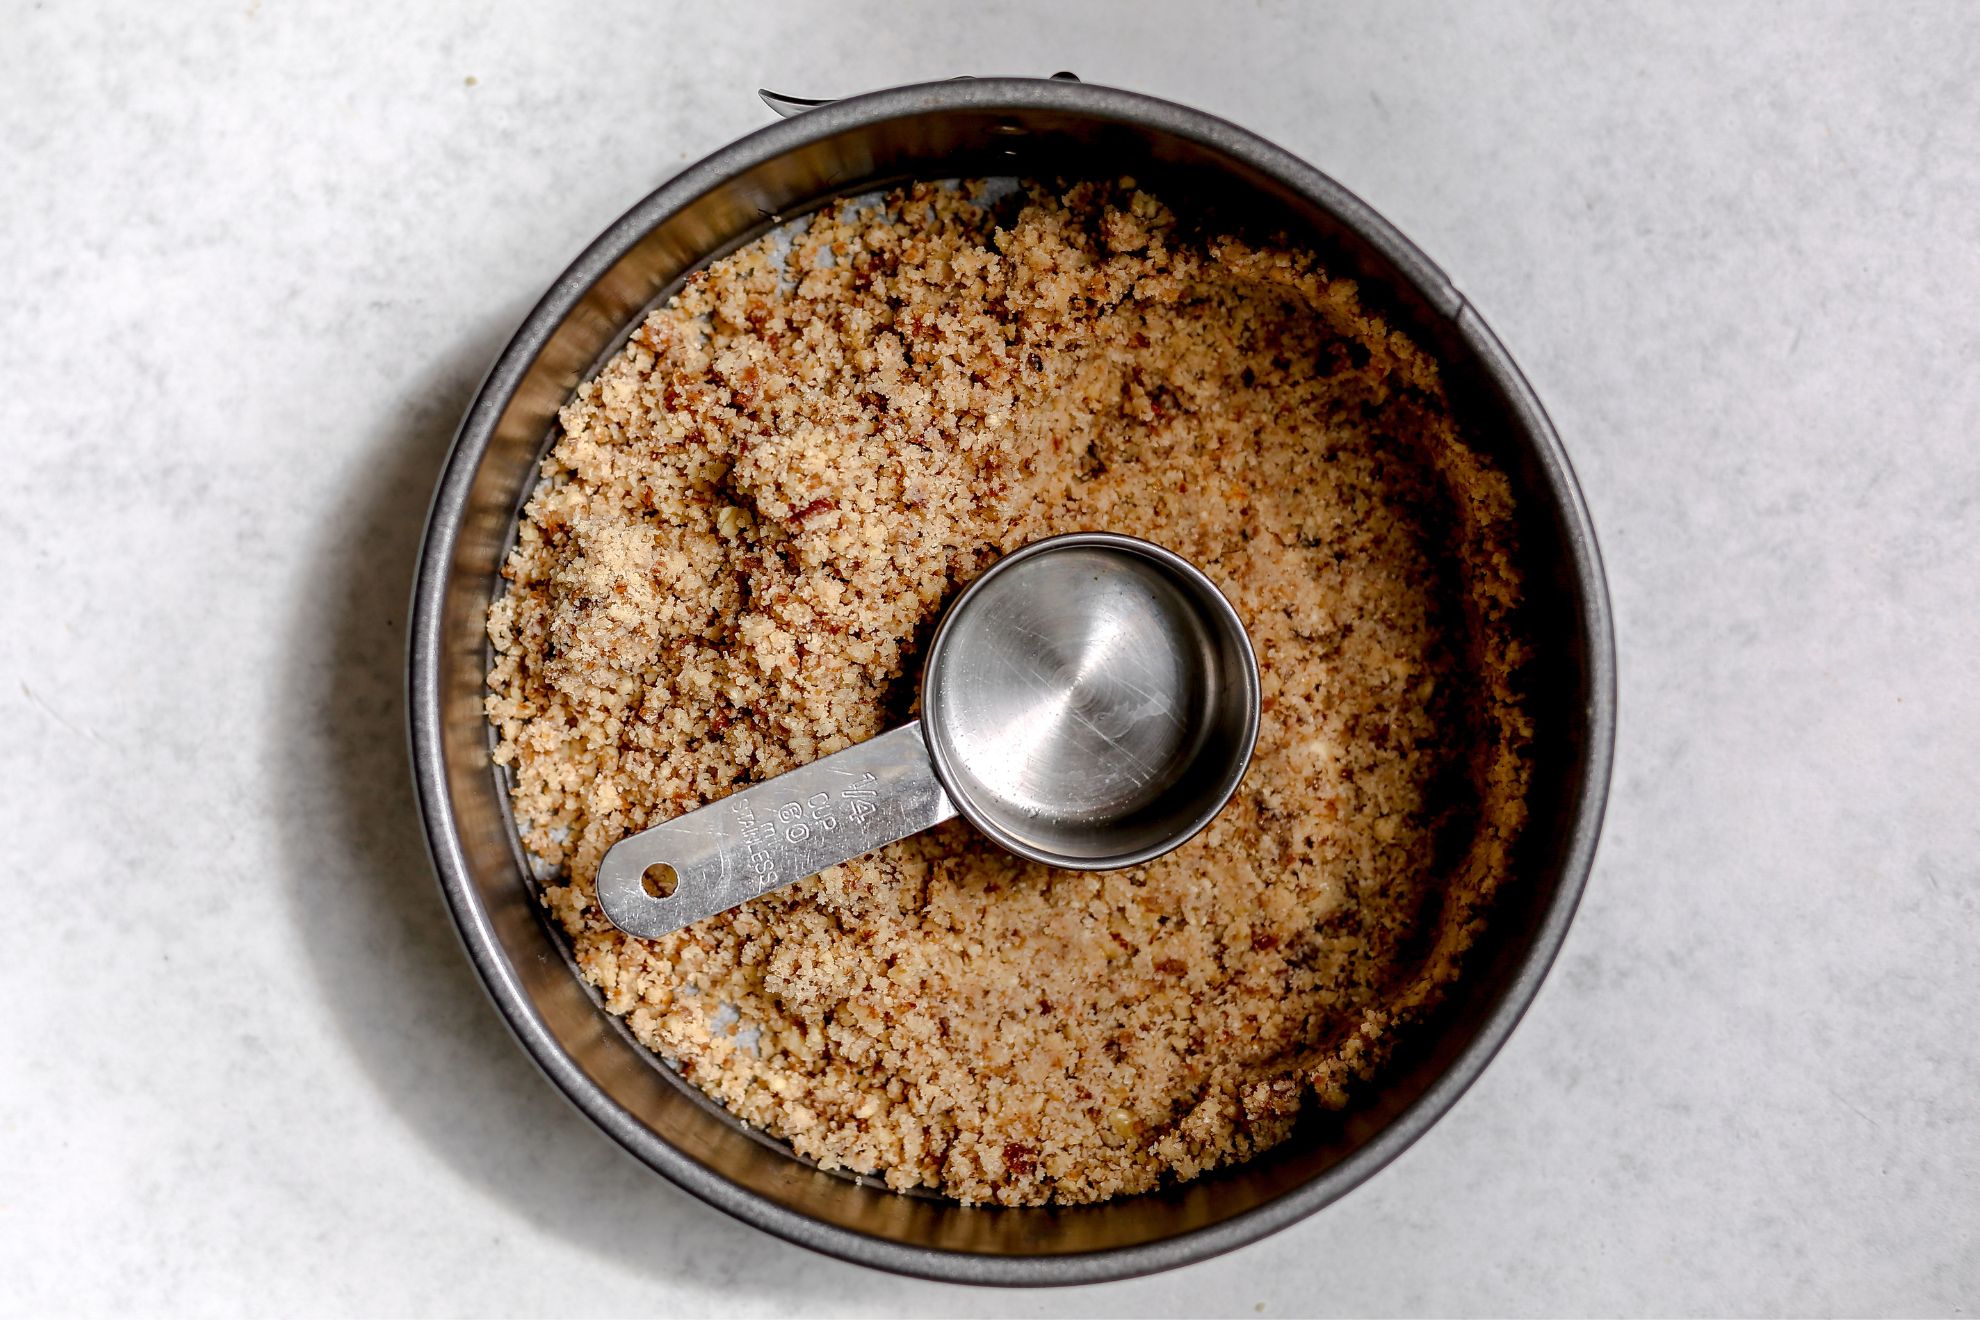 This is an overhead horizontal image of a circular pan with a nutty crumble crust at the bottom. A 1/4 cup dry measuring cup is in the center of the crust. It appears the right side of the crust has been pressed and flattened into the bottom and sides of the pan while the left side is still loose and crumbly. The pan sits on a white surface.